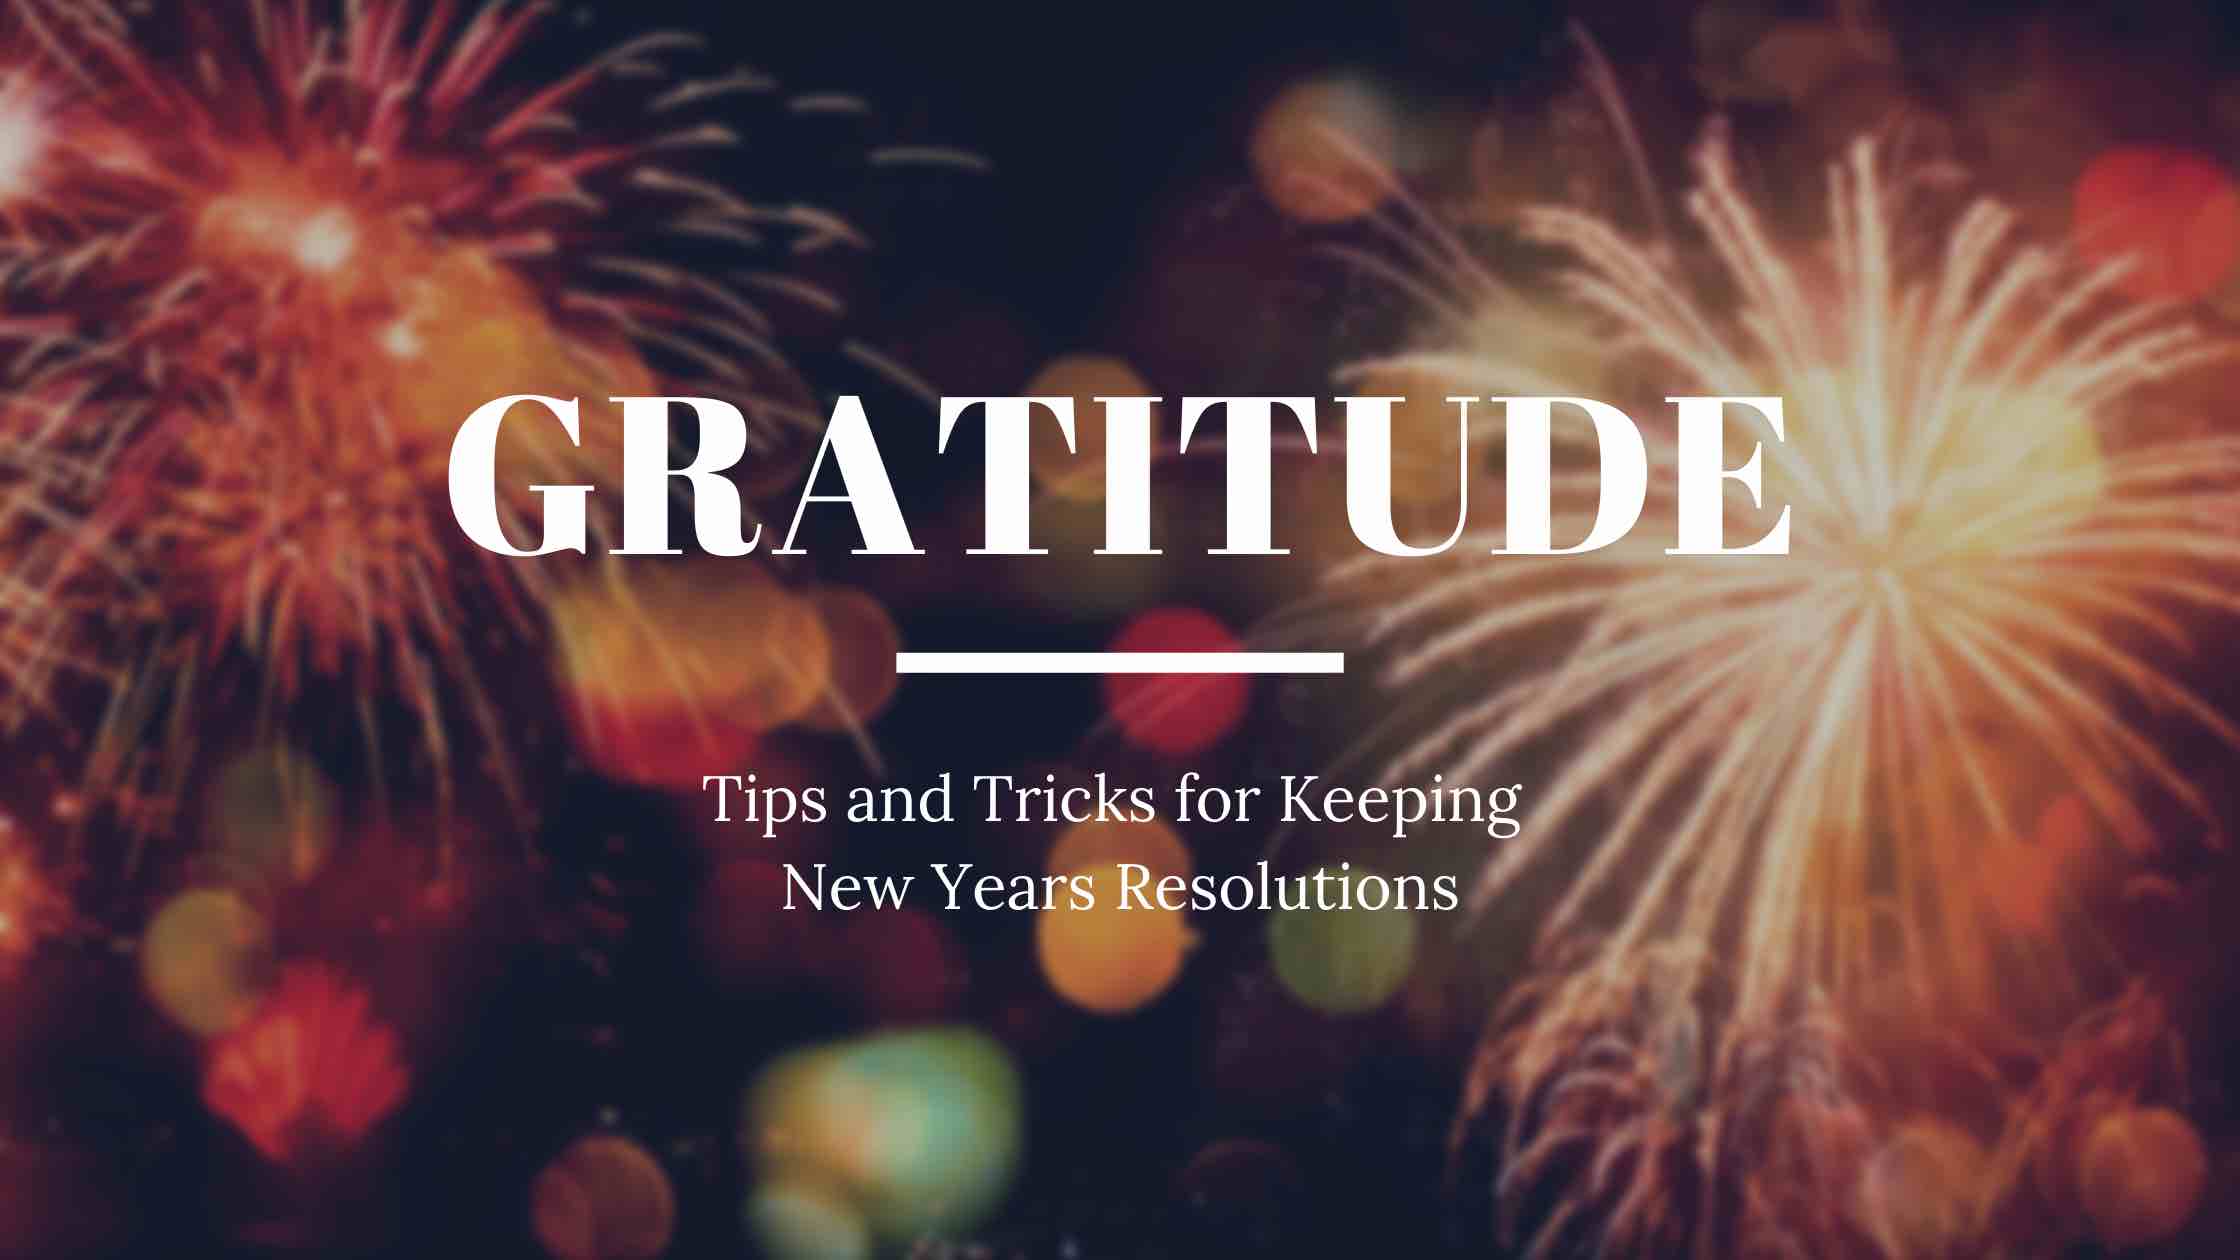 Fireworks go off in the background as a metaphor for how to keep your resolutions, one idea being finding gratitude.